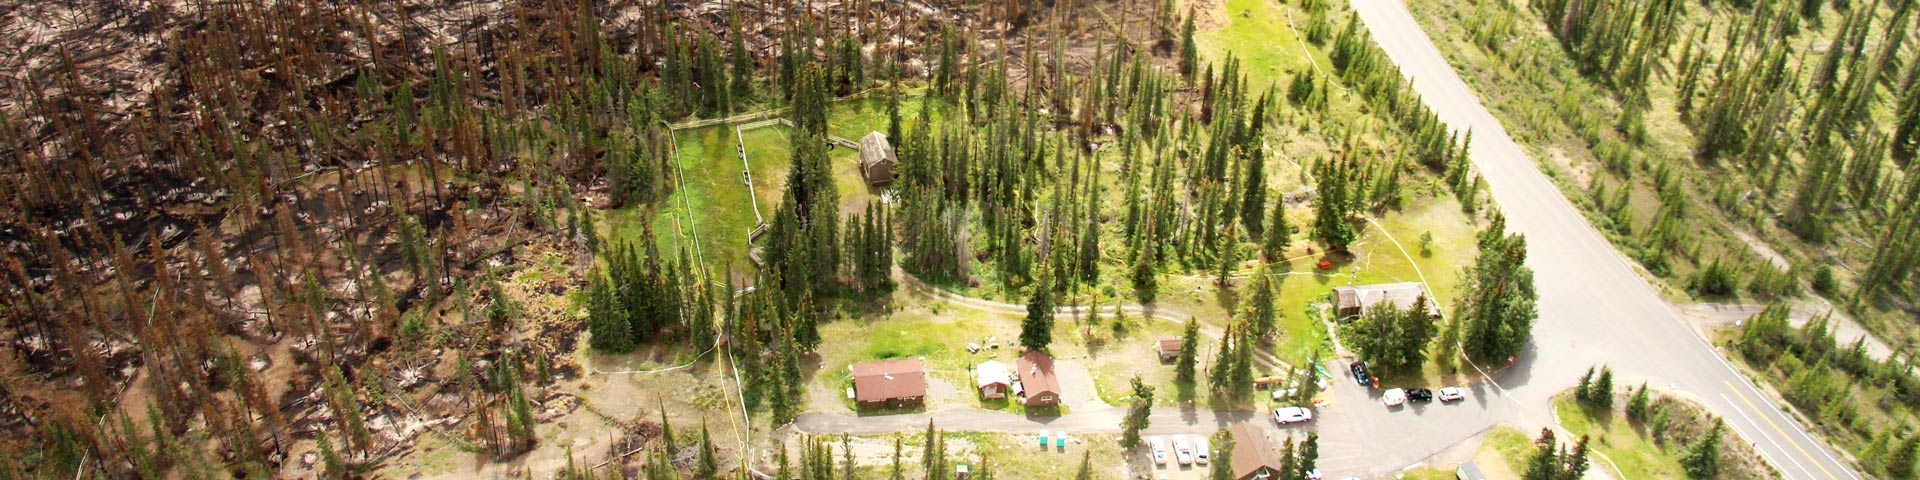 A striking image showing burnt trees adjacent to the Saskatchewan Crossing warden cabins. The warden cabins were protected using structural protection equipment and forest thinning prior to prescribed fire operations.